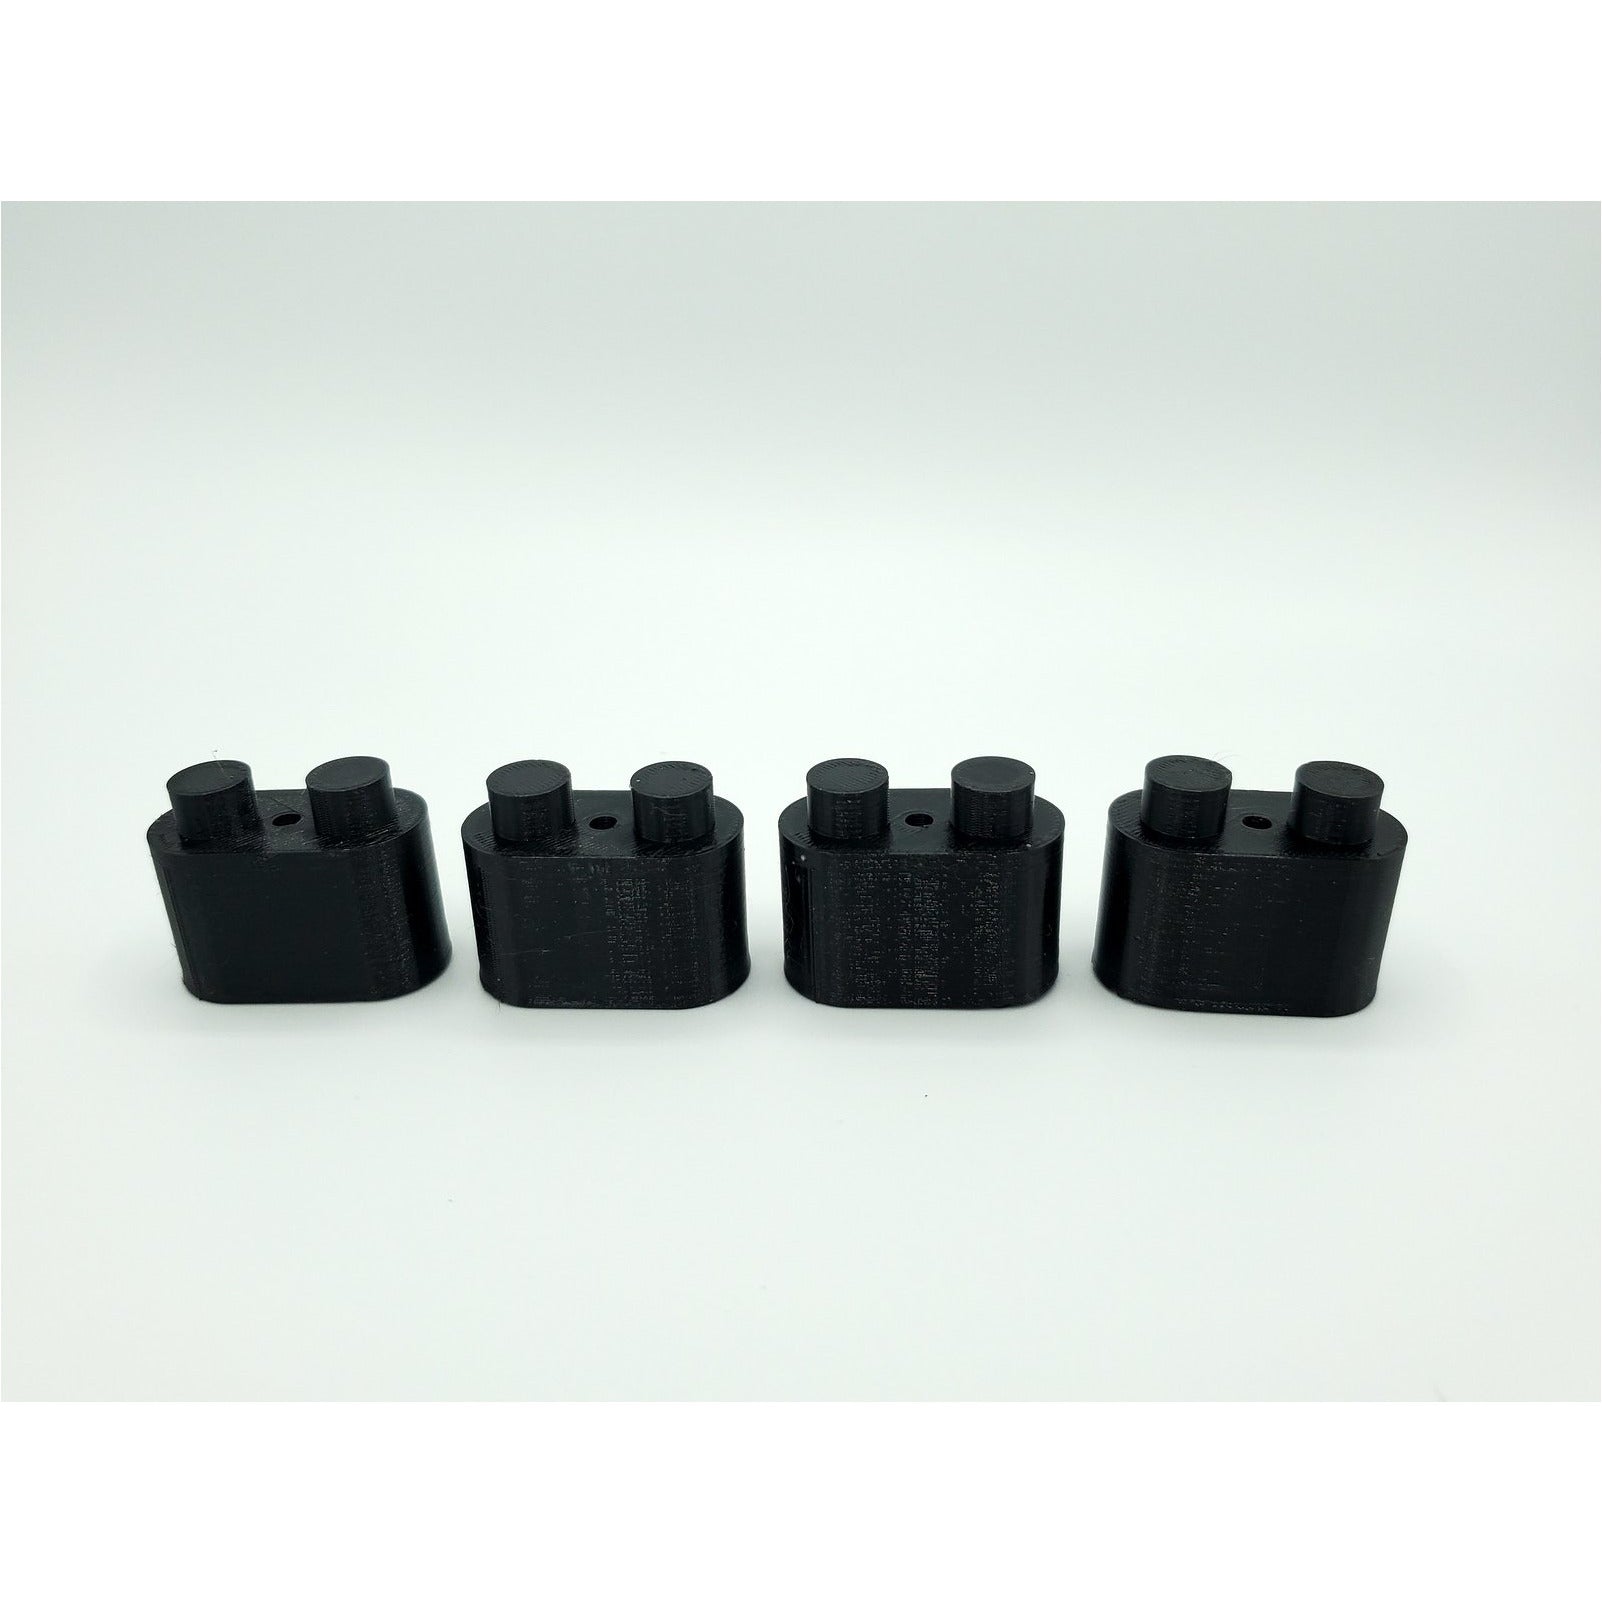 FOH Connect Legs (4 Pack)